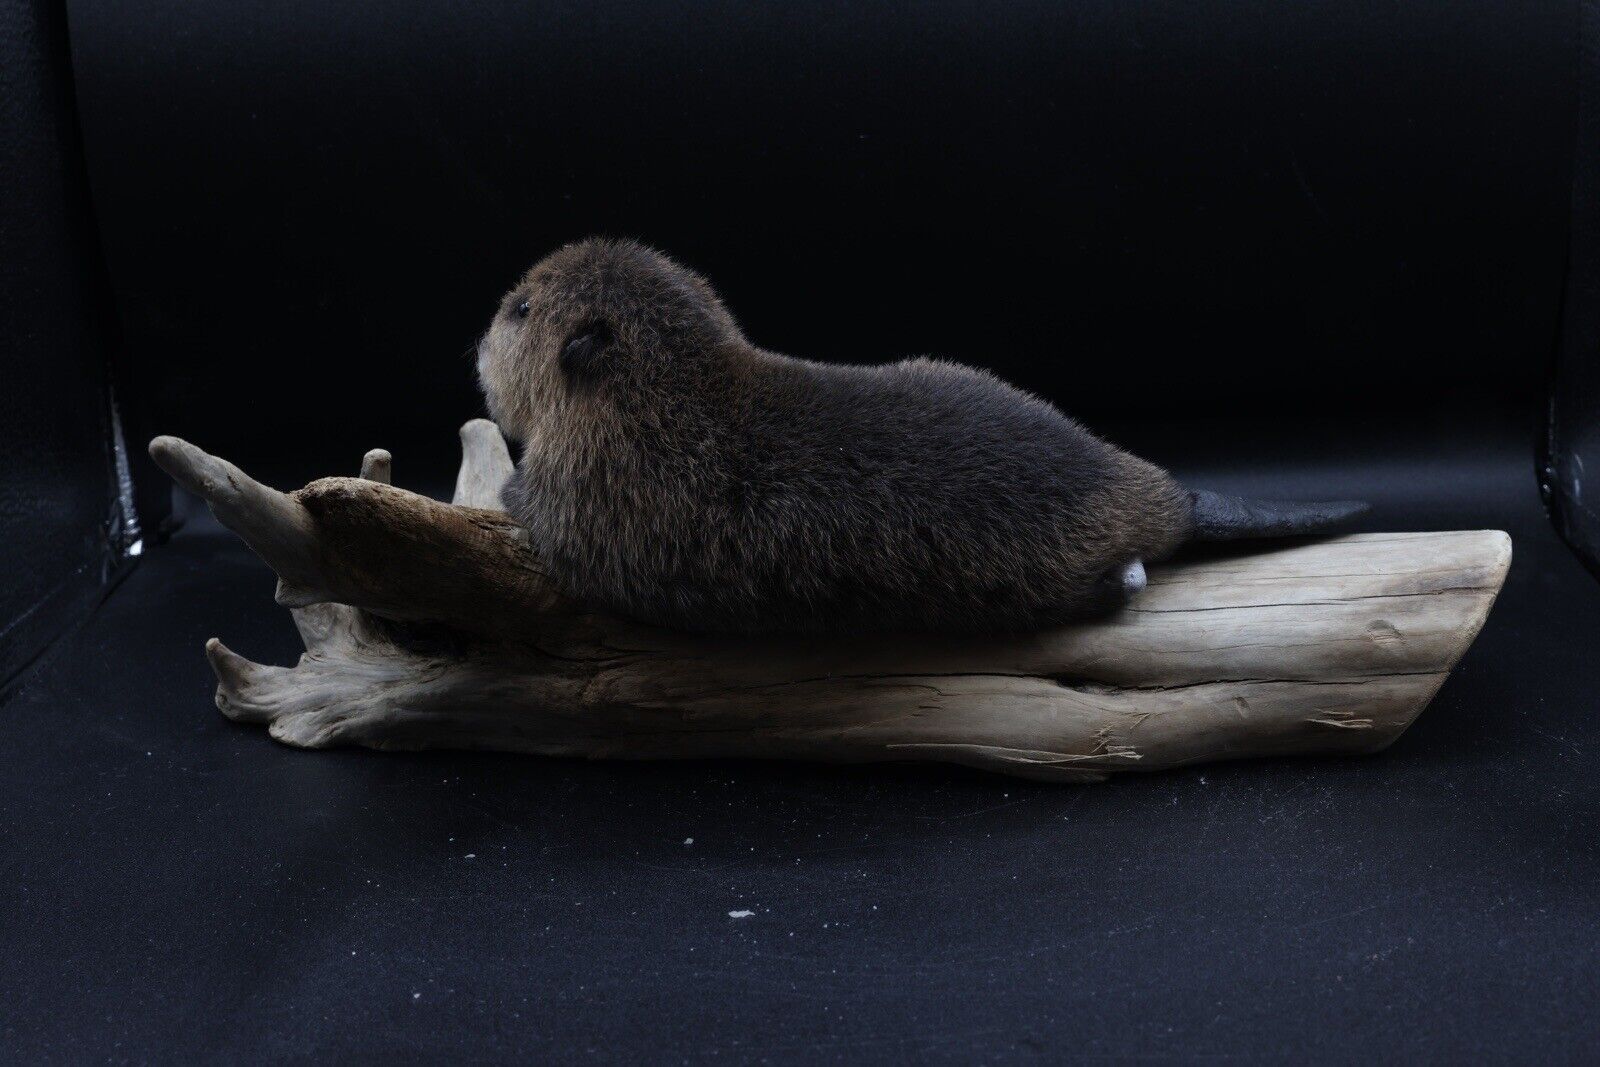 Museum Quality Beautiful Adorable Baby Beaver Kit Taxidermy Mount Art Wildlife